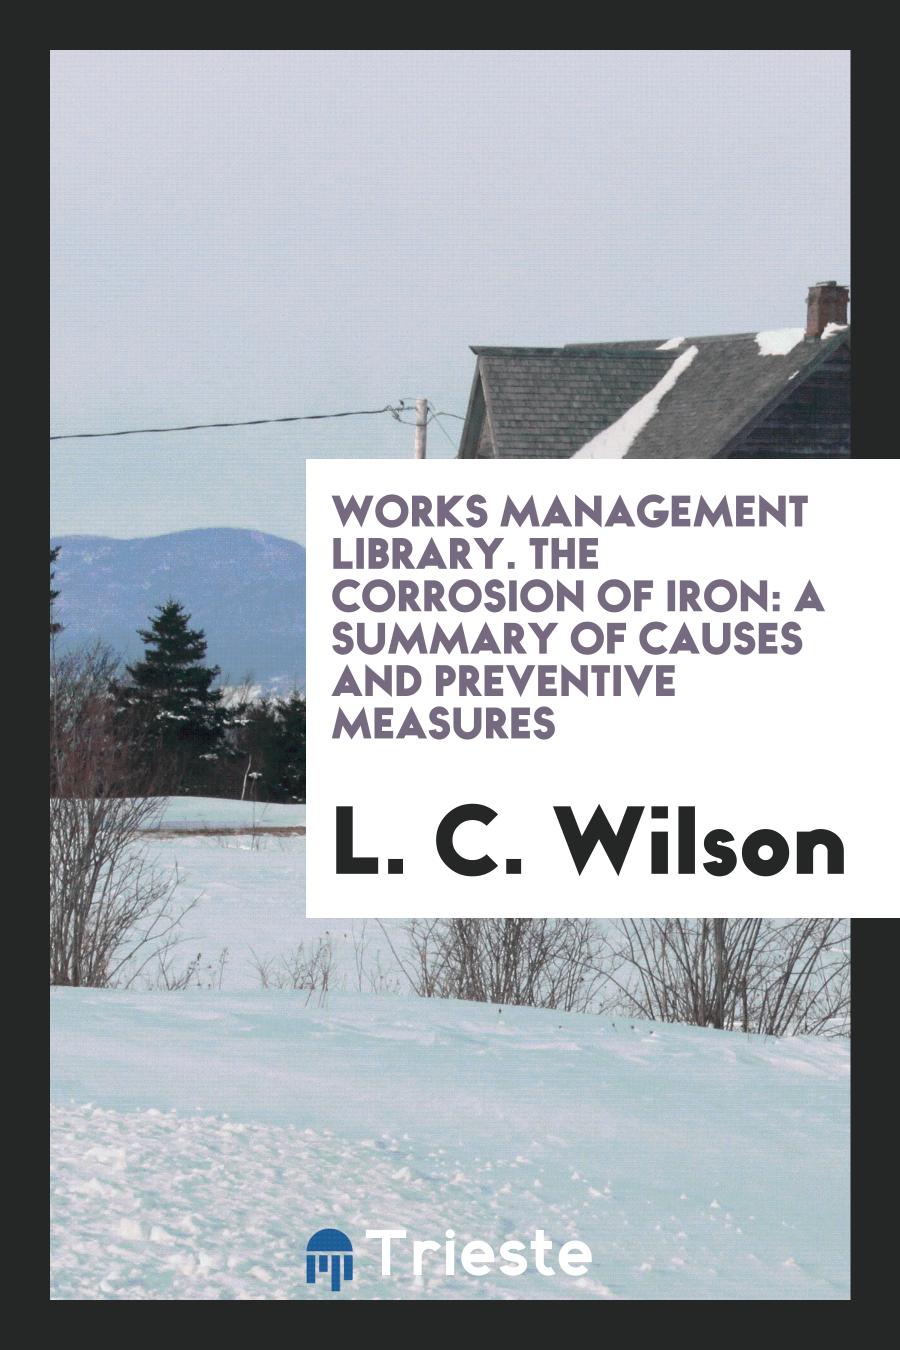 Works Management Library. The Corrosion of Iron: A Summary of Causes and Preventive Measures